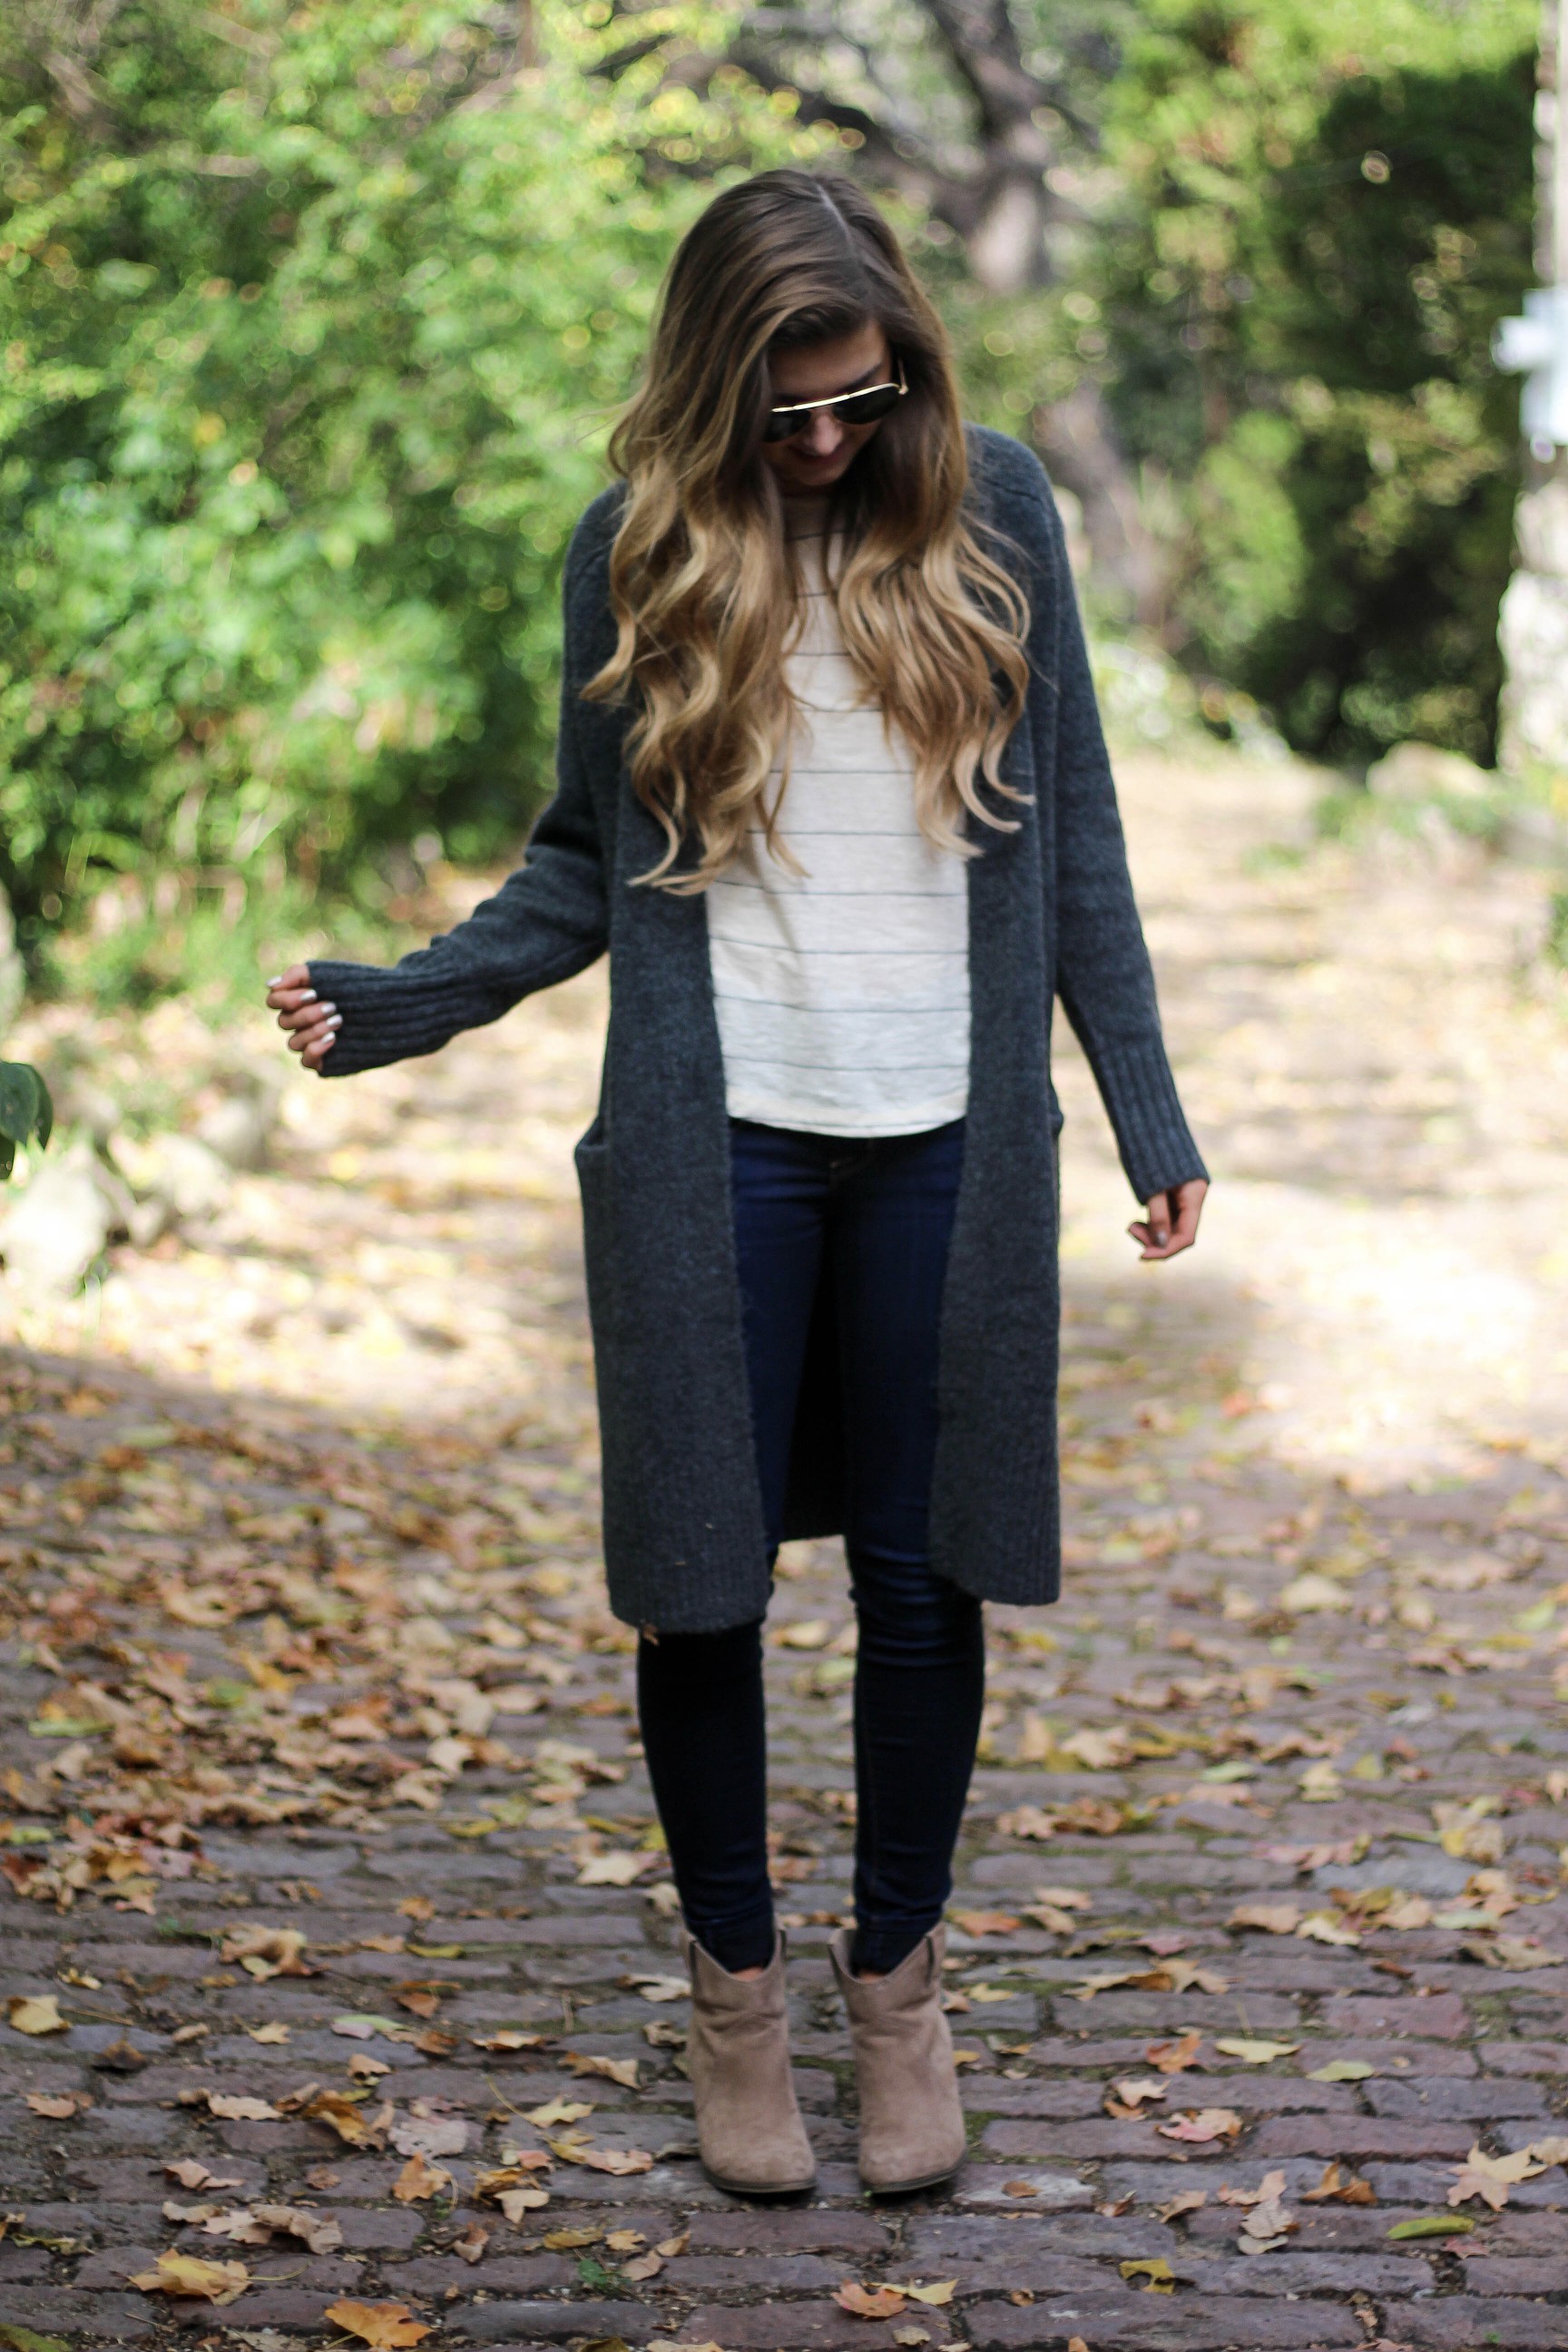 Long cardigan with striped shirt cute and simple outfit for fall! Perfectly paired with booties. The perfect fall or winter outfit by Lauren Lindmark on Daily Dose of Charm dailydoseofcharm.com